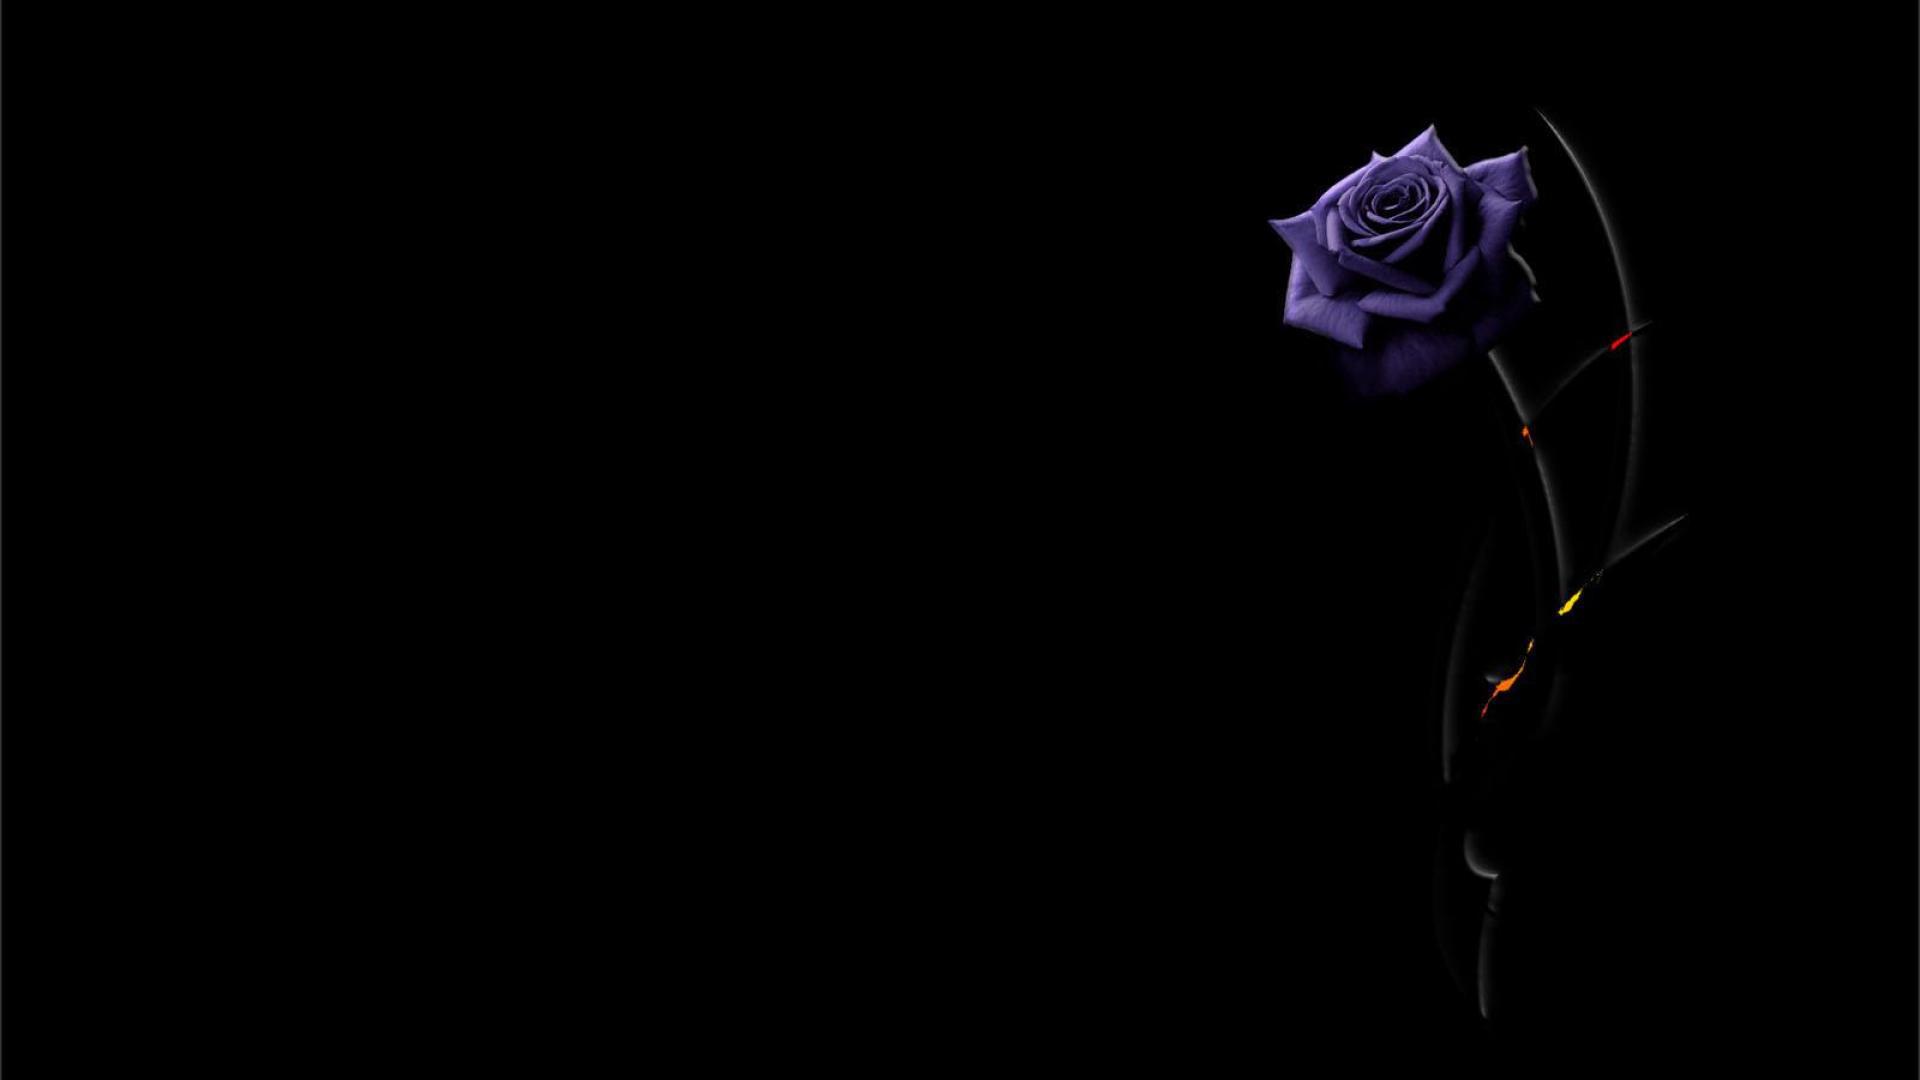 Beautiful Purple Rose On A Black Background Wallpaper And Image